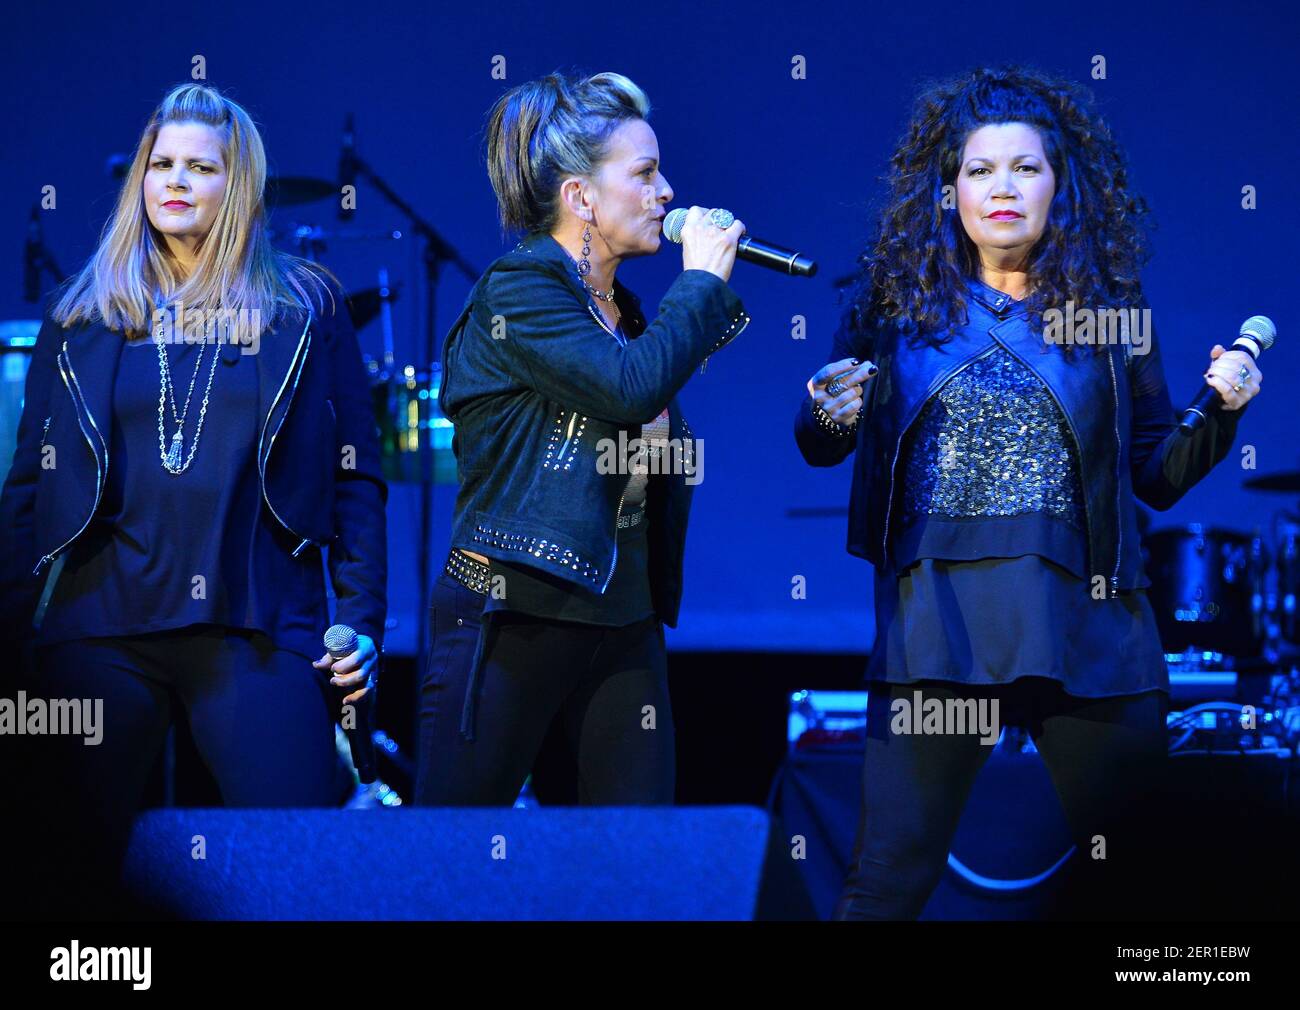 CORAL GABLES, FL - MARCH 10: Ann Curless, Gioia Bruno, Jeanette Jurado of  Expose perform during the Super Freestyle Explosion at Watsco Center on  March 10, 2018 in Coral Gables, Florida. (Photo